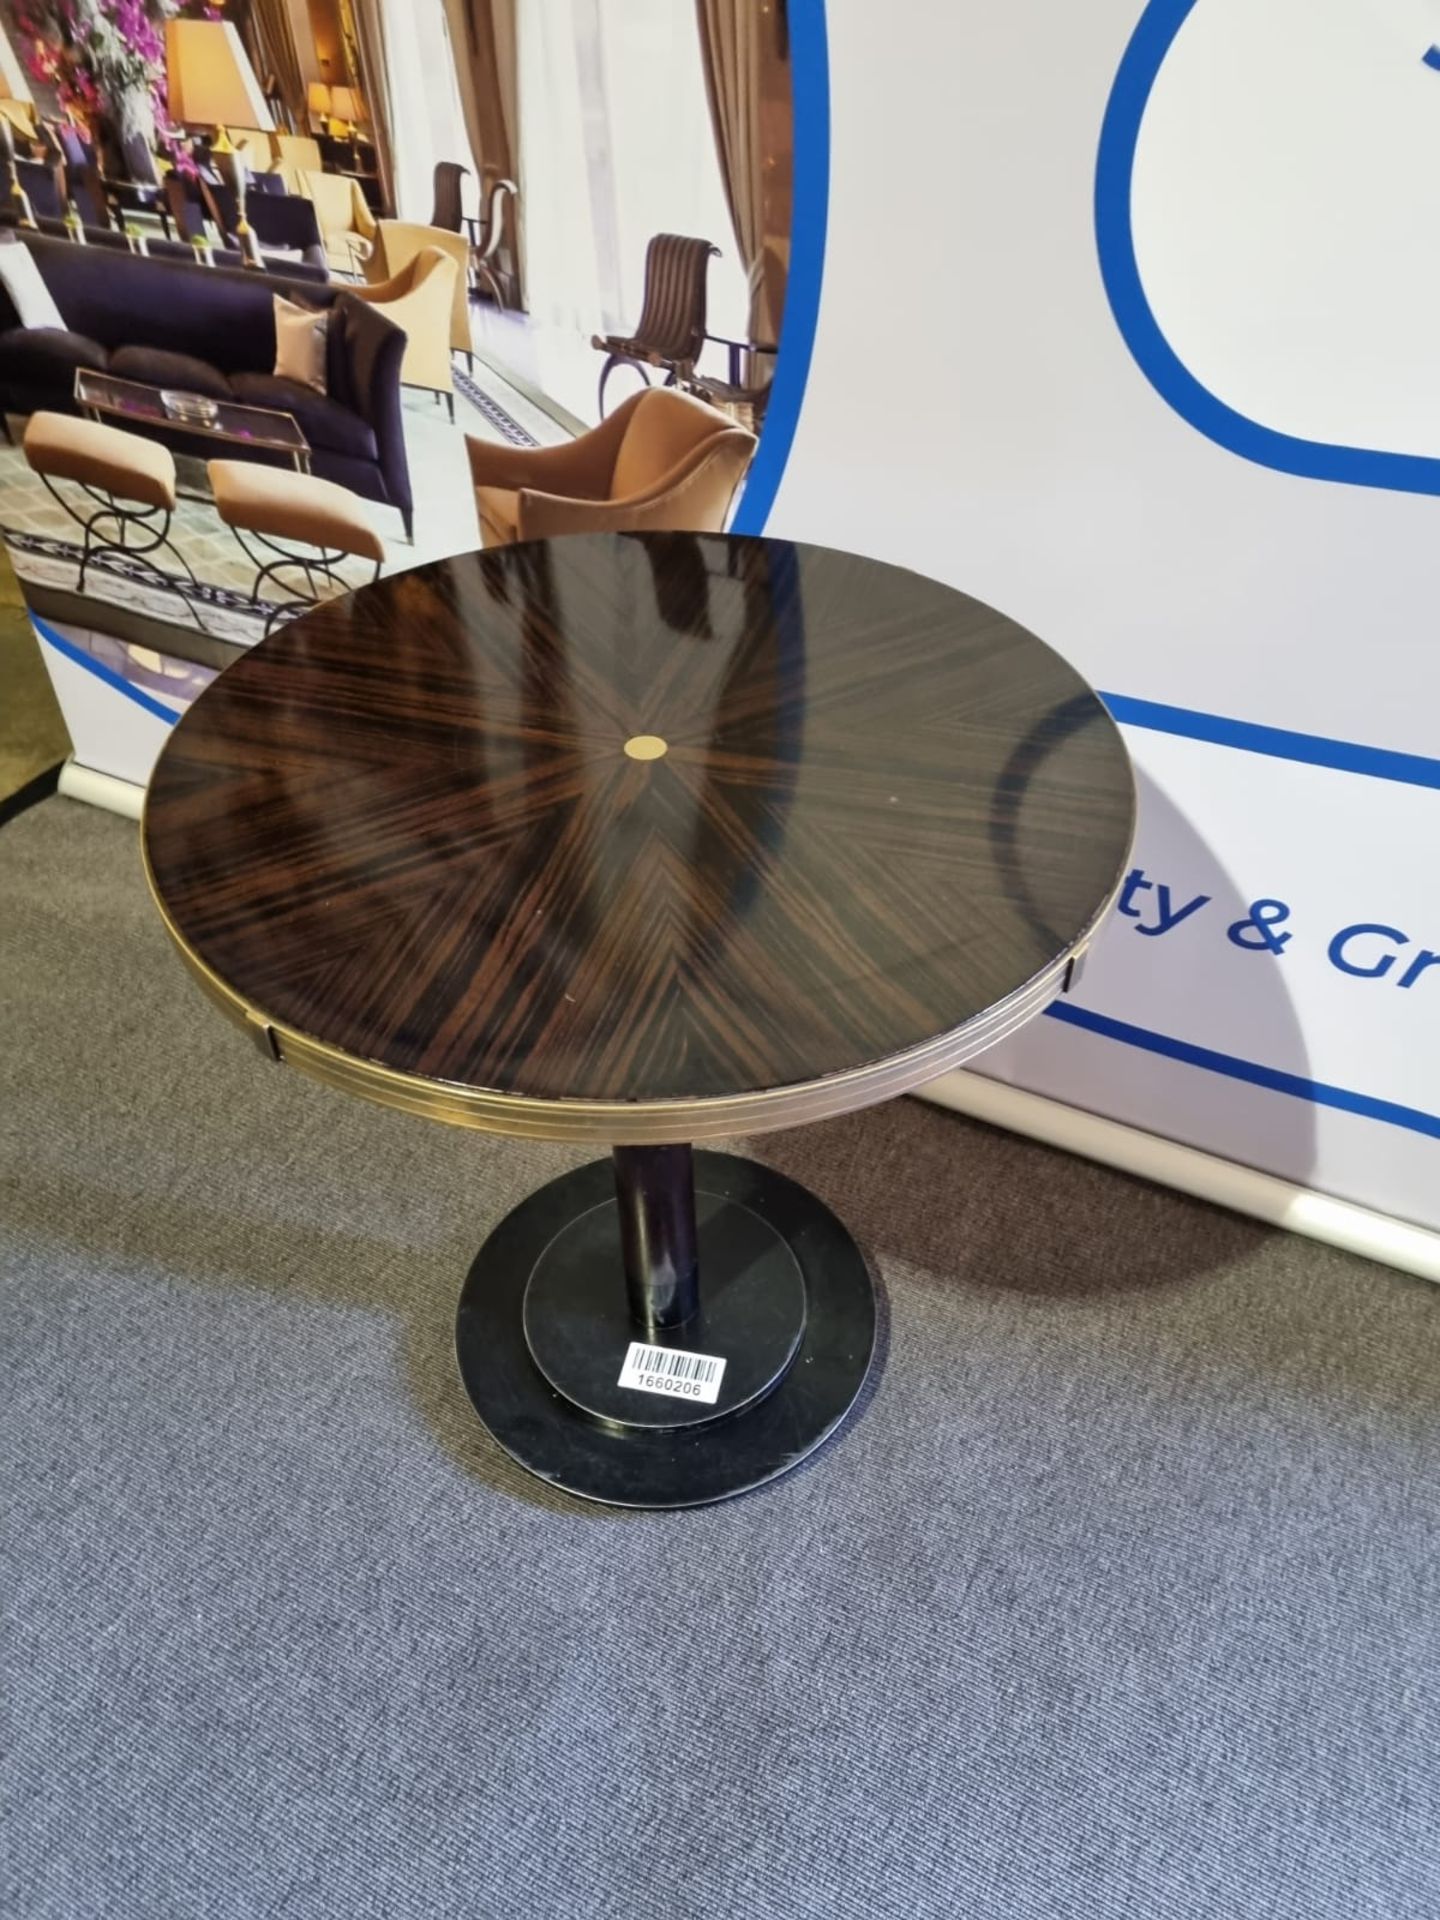 Macassar Ebony circular top dining table with brass trim mounted on a cast iron pedestal base 70 x